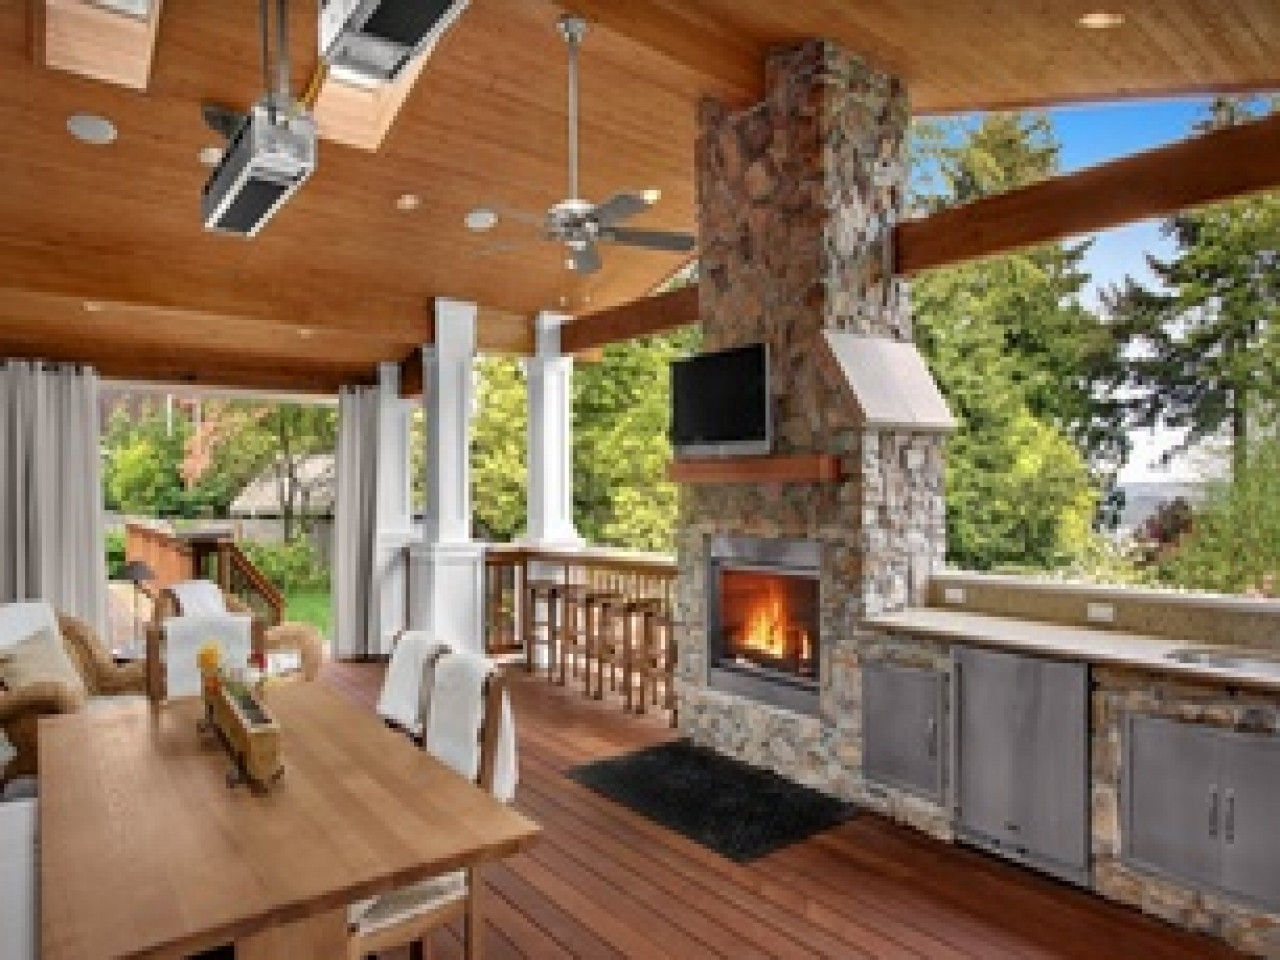 Outdoor Kitchen Designs With Fireplace
 Indoor porches outdoor kitchen designs with fireplace